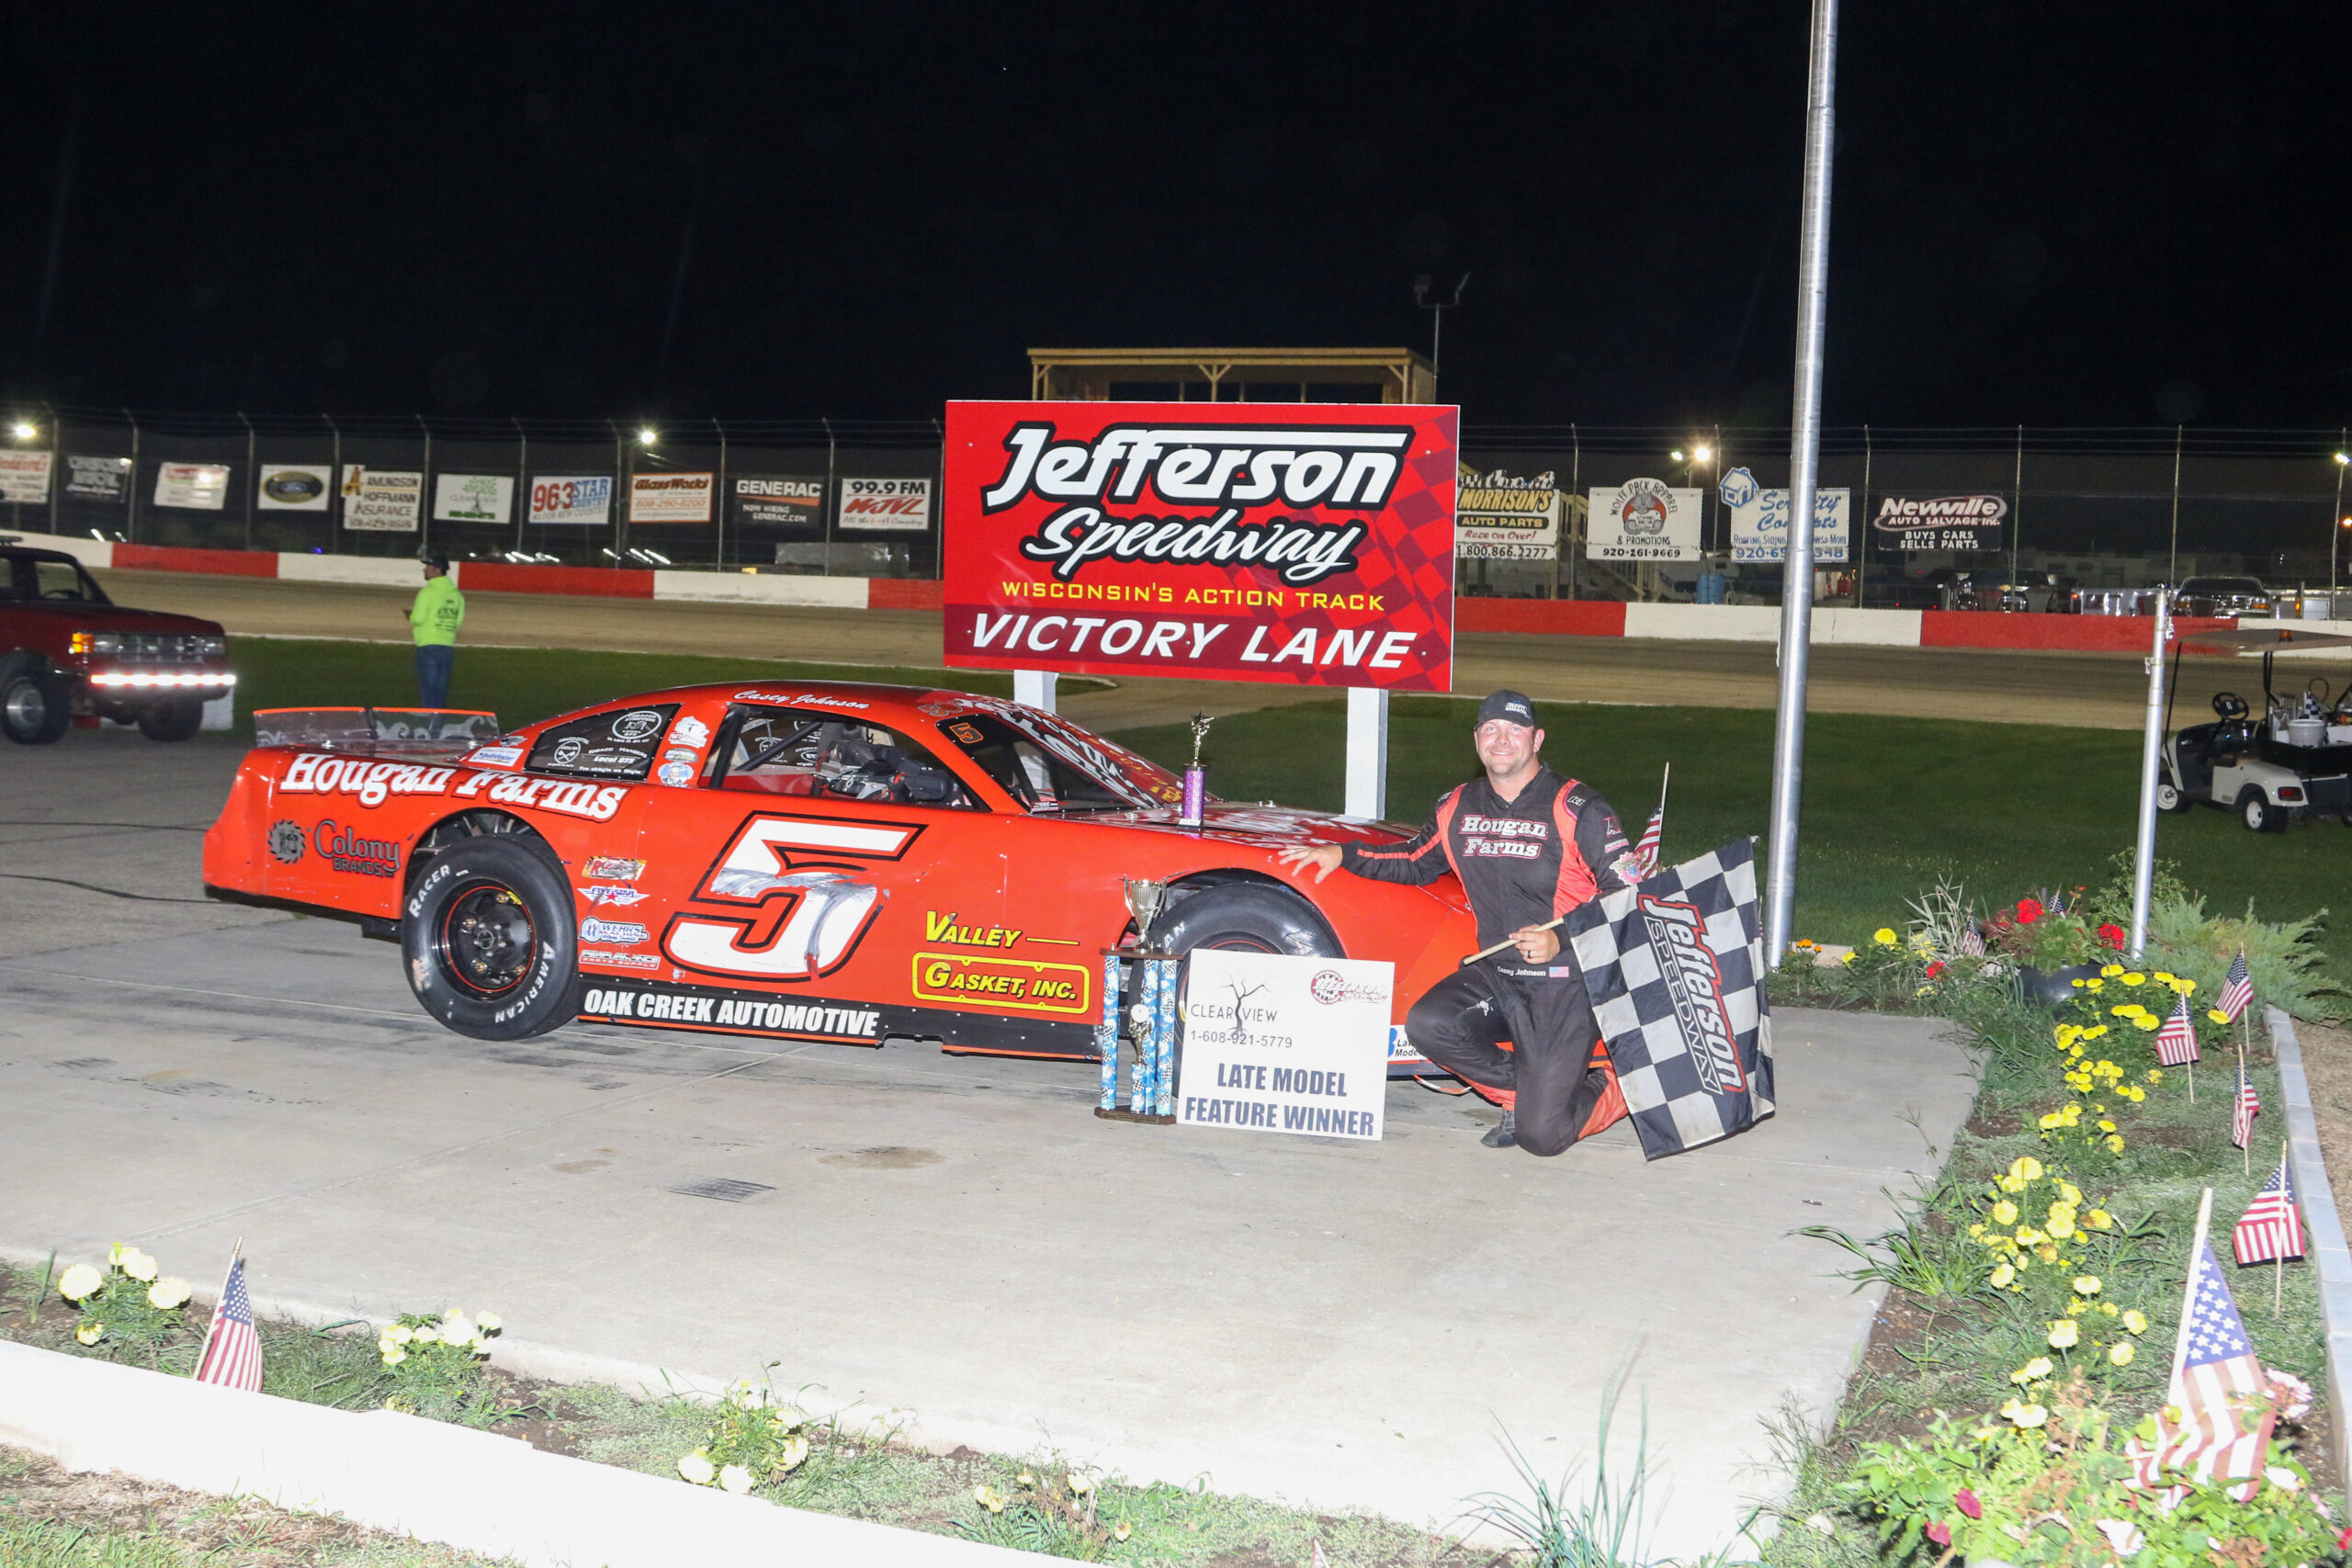 CASEY JOHNSON DOUBLES UP AT JEFFERSON SPEEDWAY